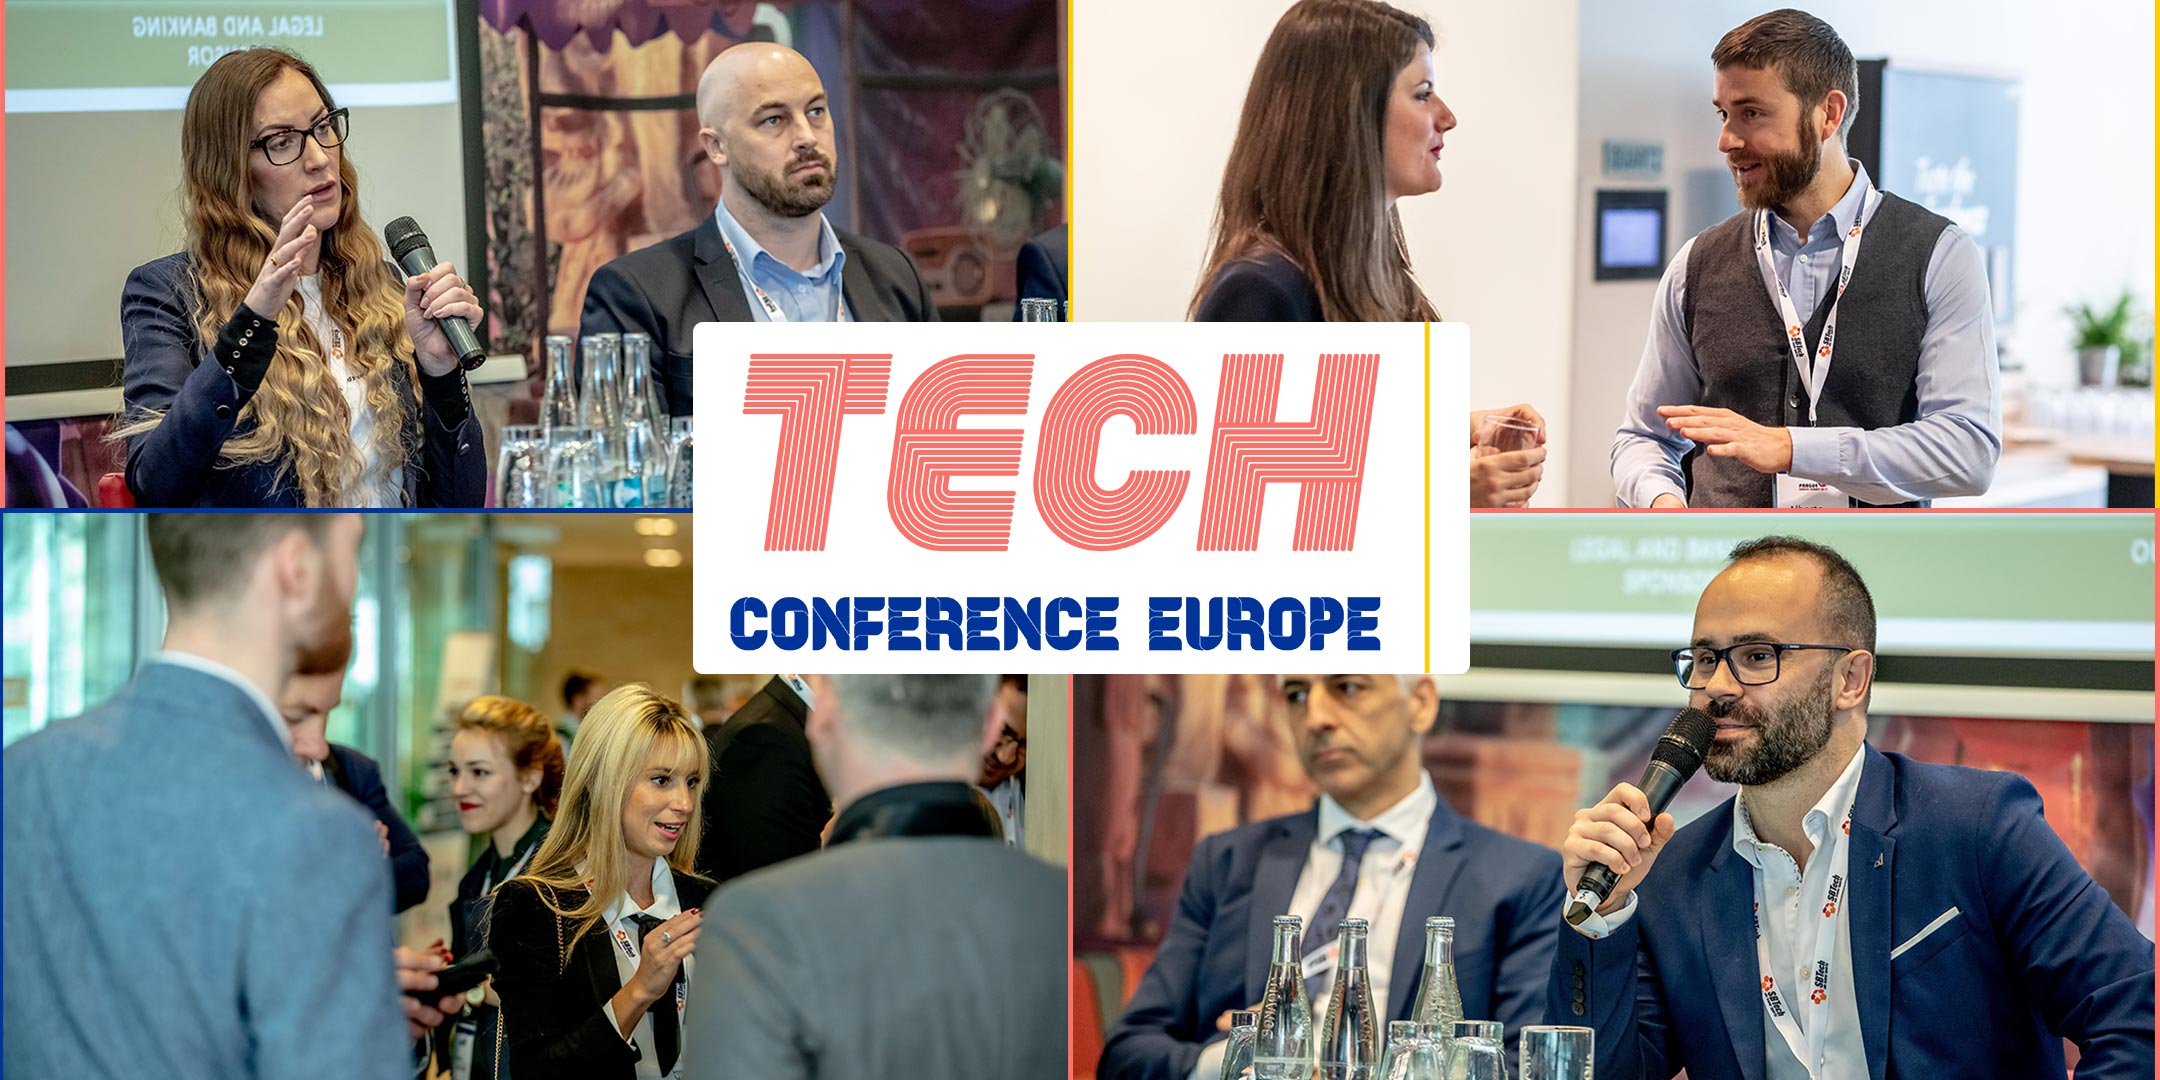 PICANTE TECH Conference Europe announces the provisional agenda and first batch of confirmed speakers